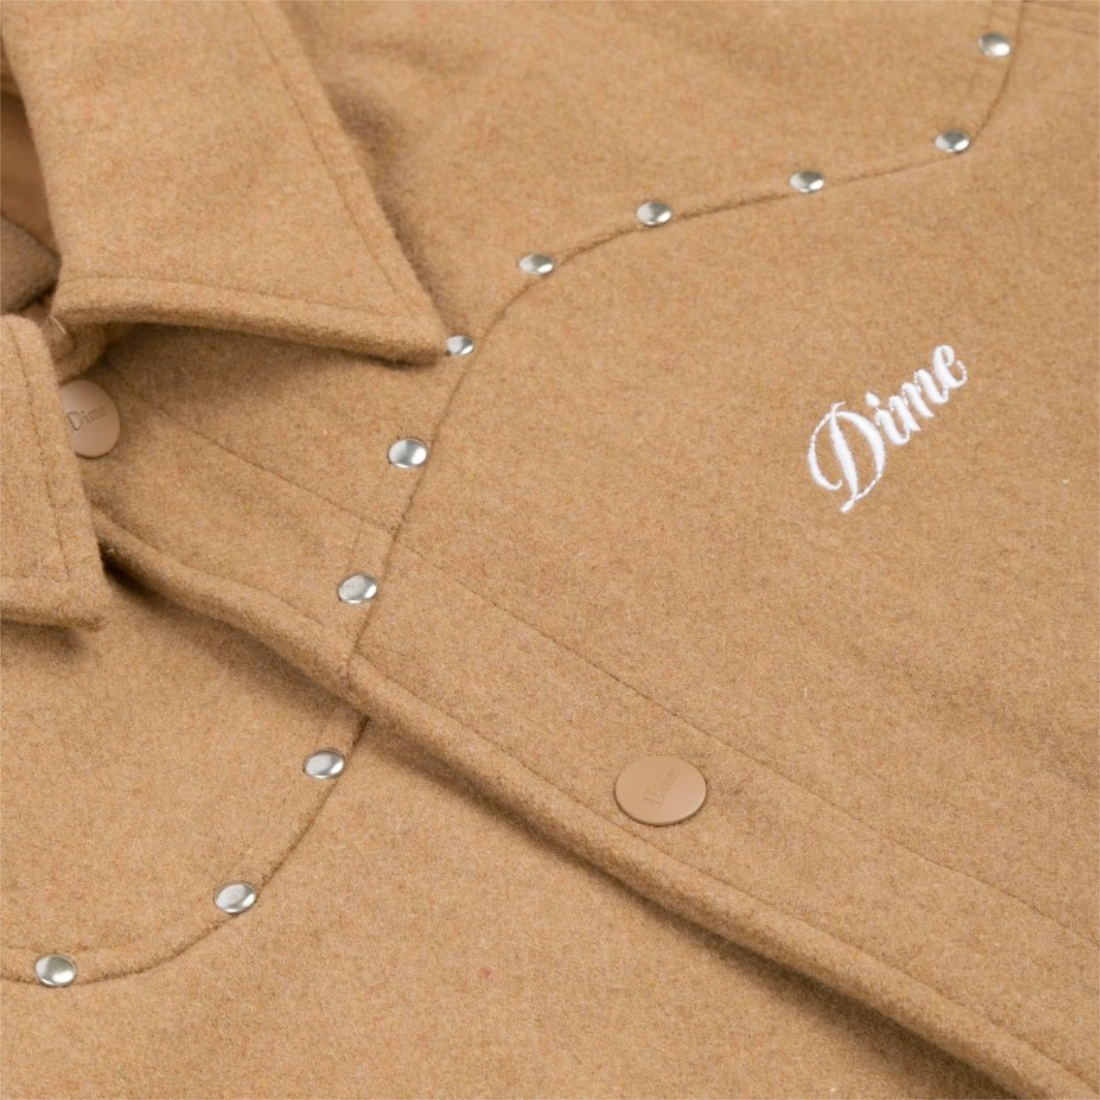 【XL/新品】Dime Studded Wool Bomber - Tanftc